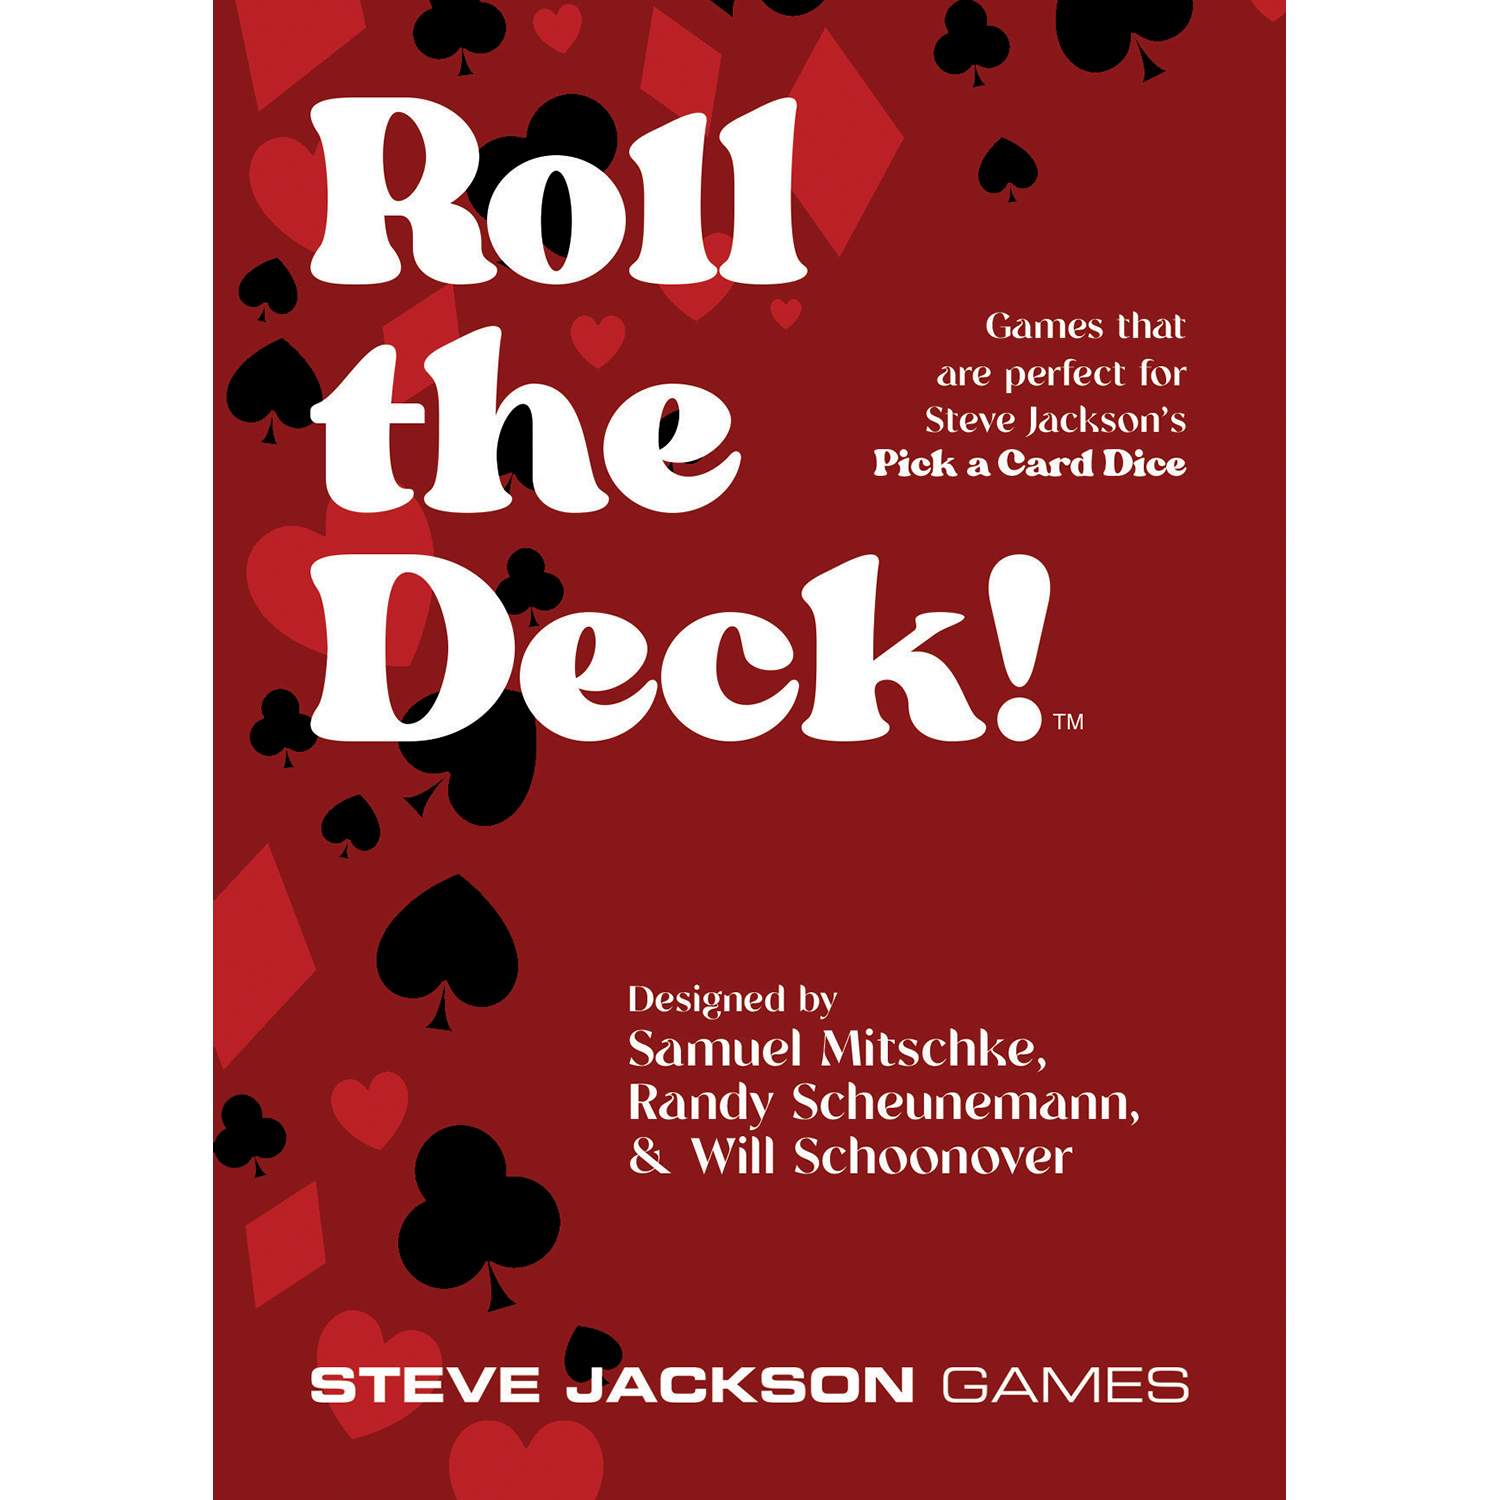 Roll the Deck!